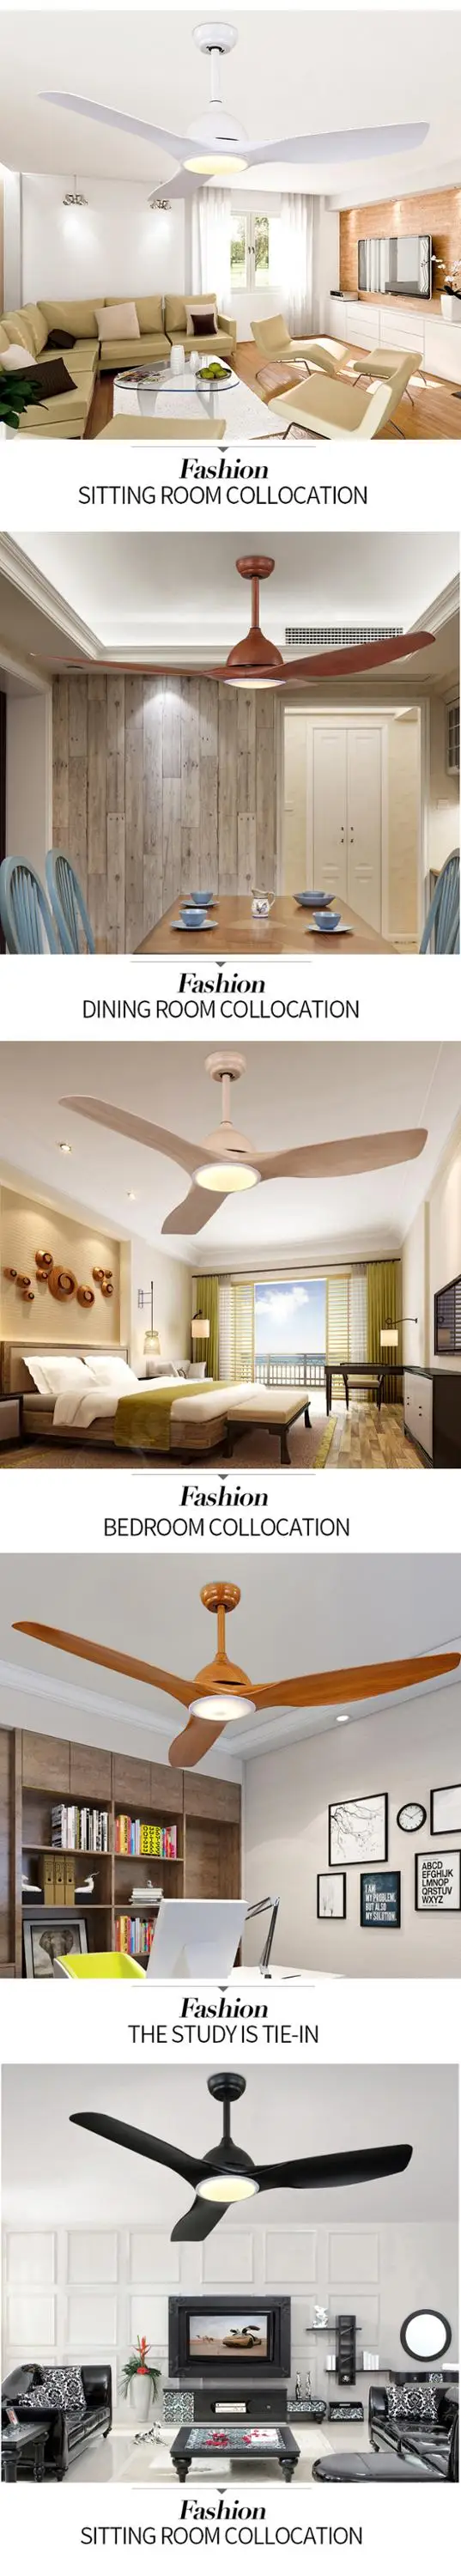 3 Wooden Blades Low Energy Ceiling Fan with 3 Color LED Light